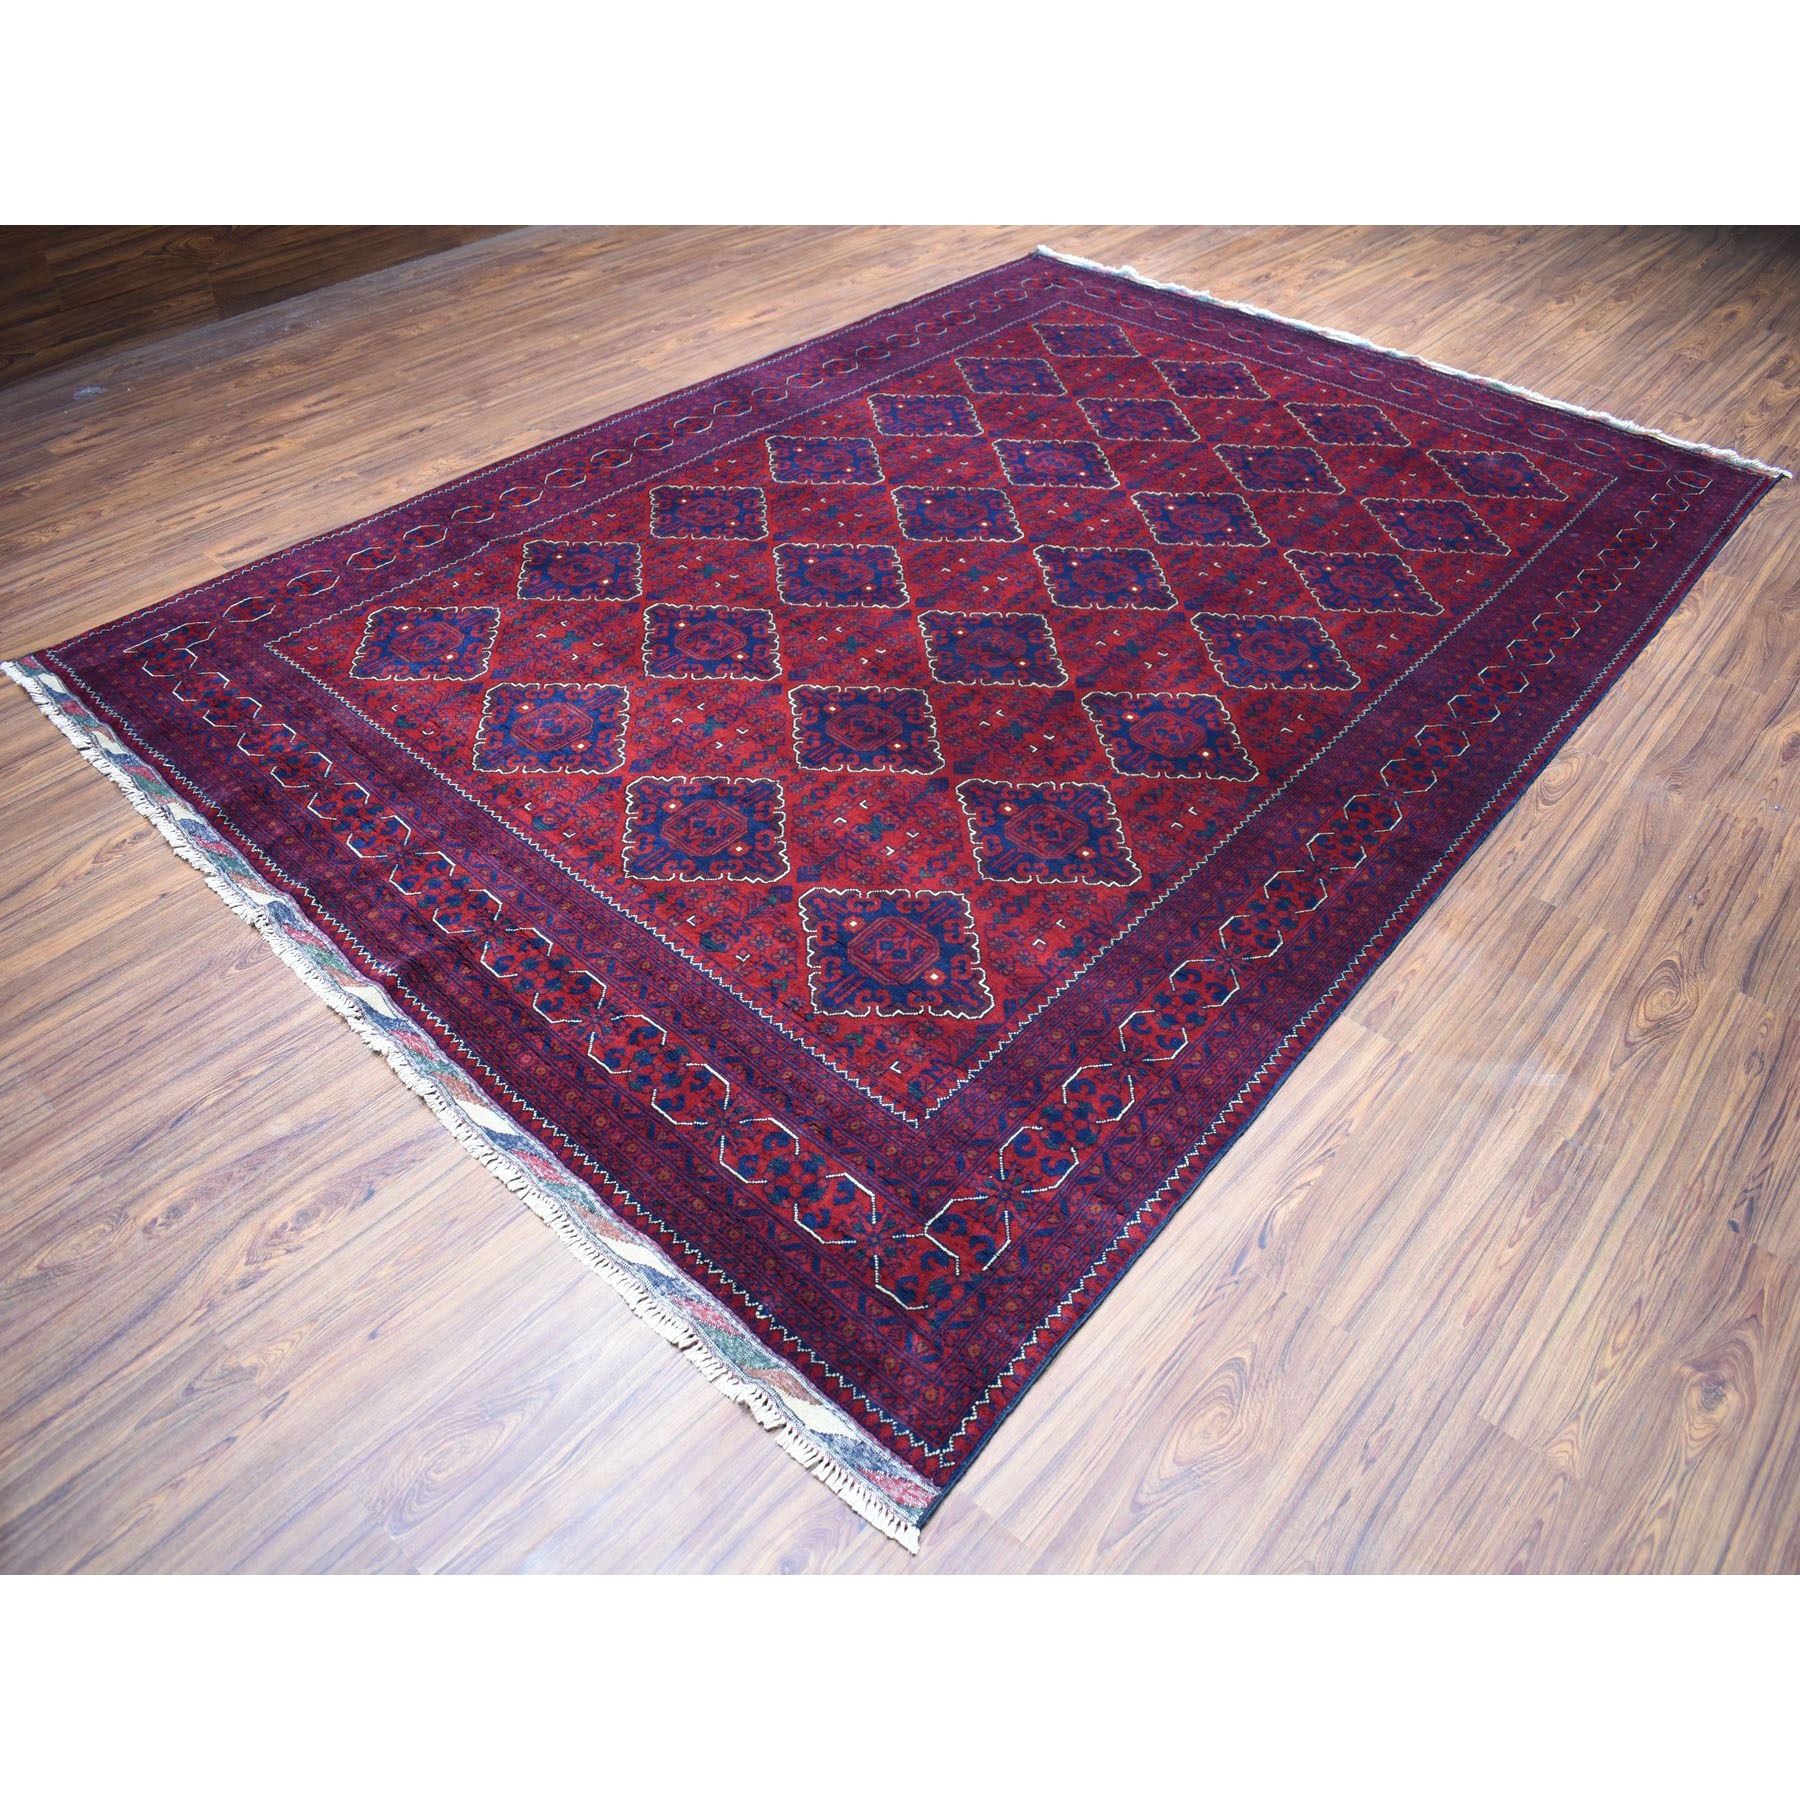 8-1 x11-2  Repetitive Design Pure Wool Afghan Khamyab Hand-Knotted Oriental Rug 